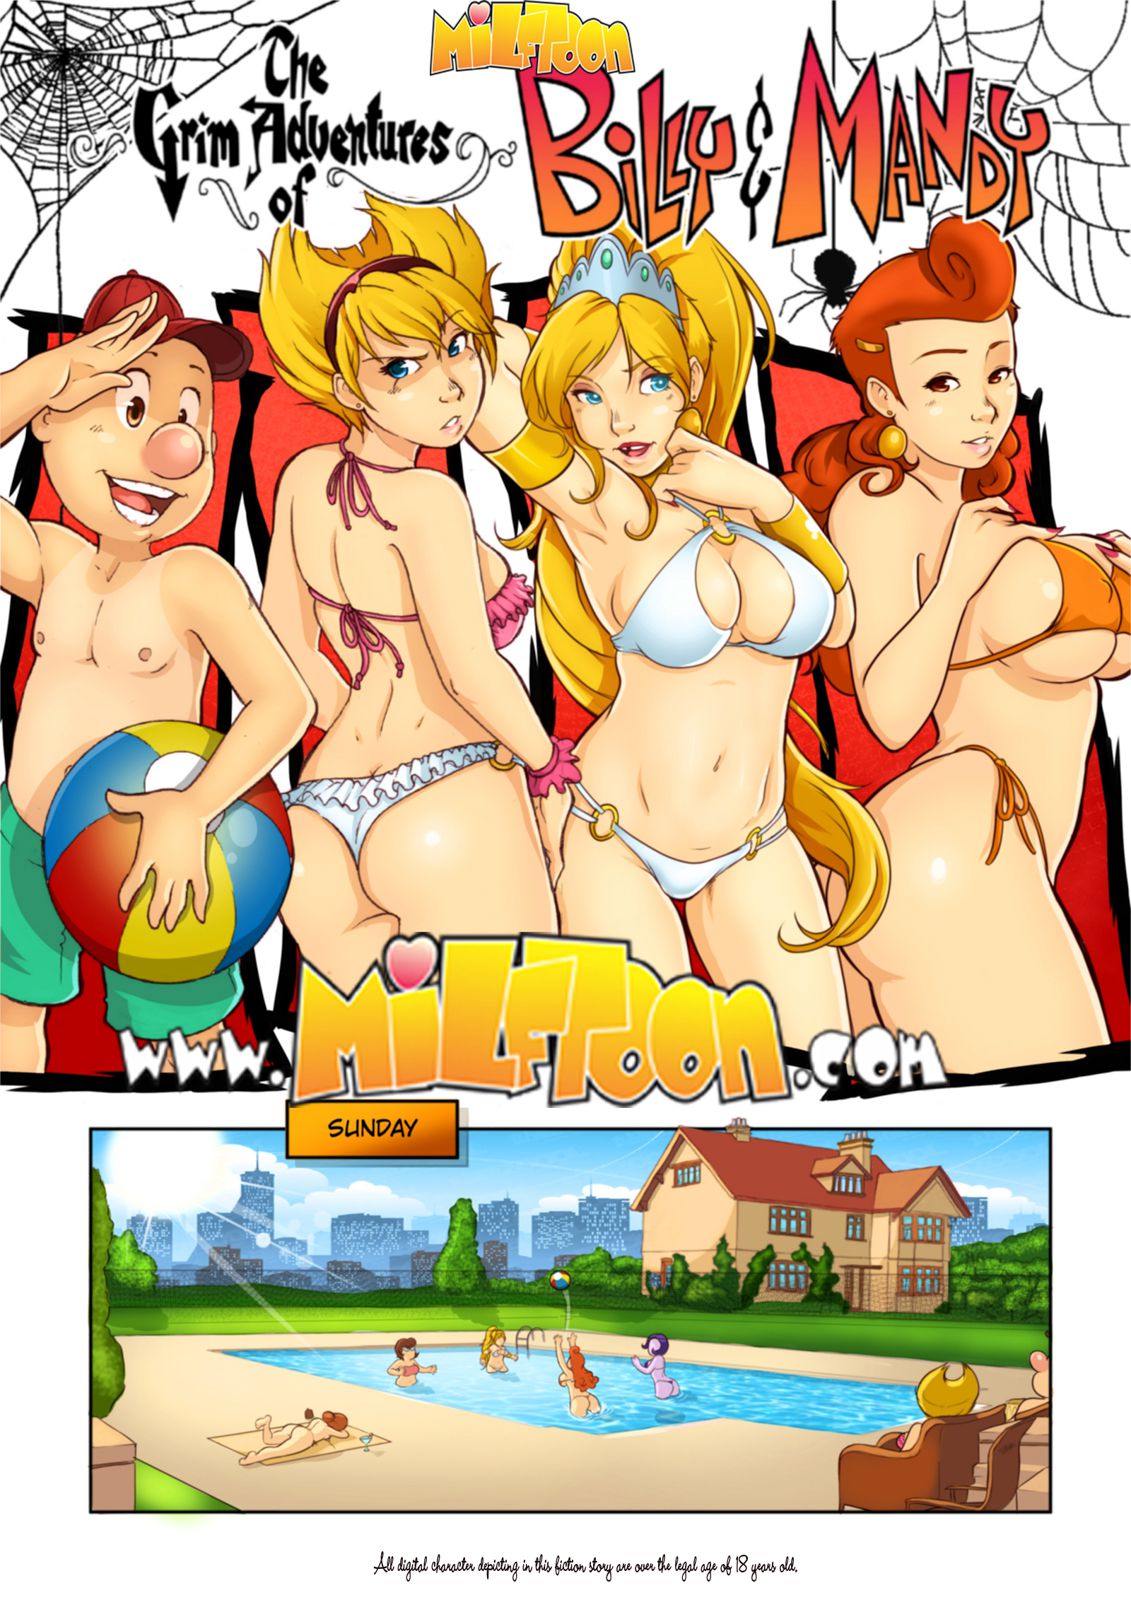 Big booty billy and mandy porn comic